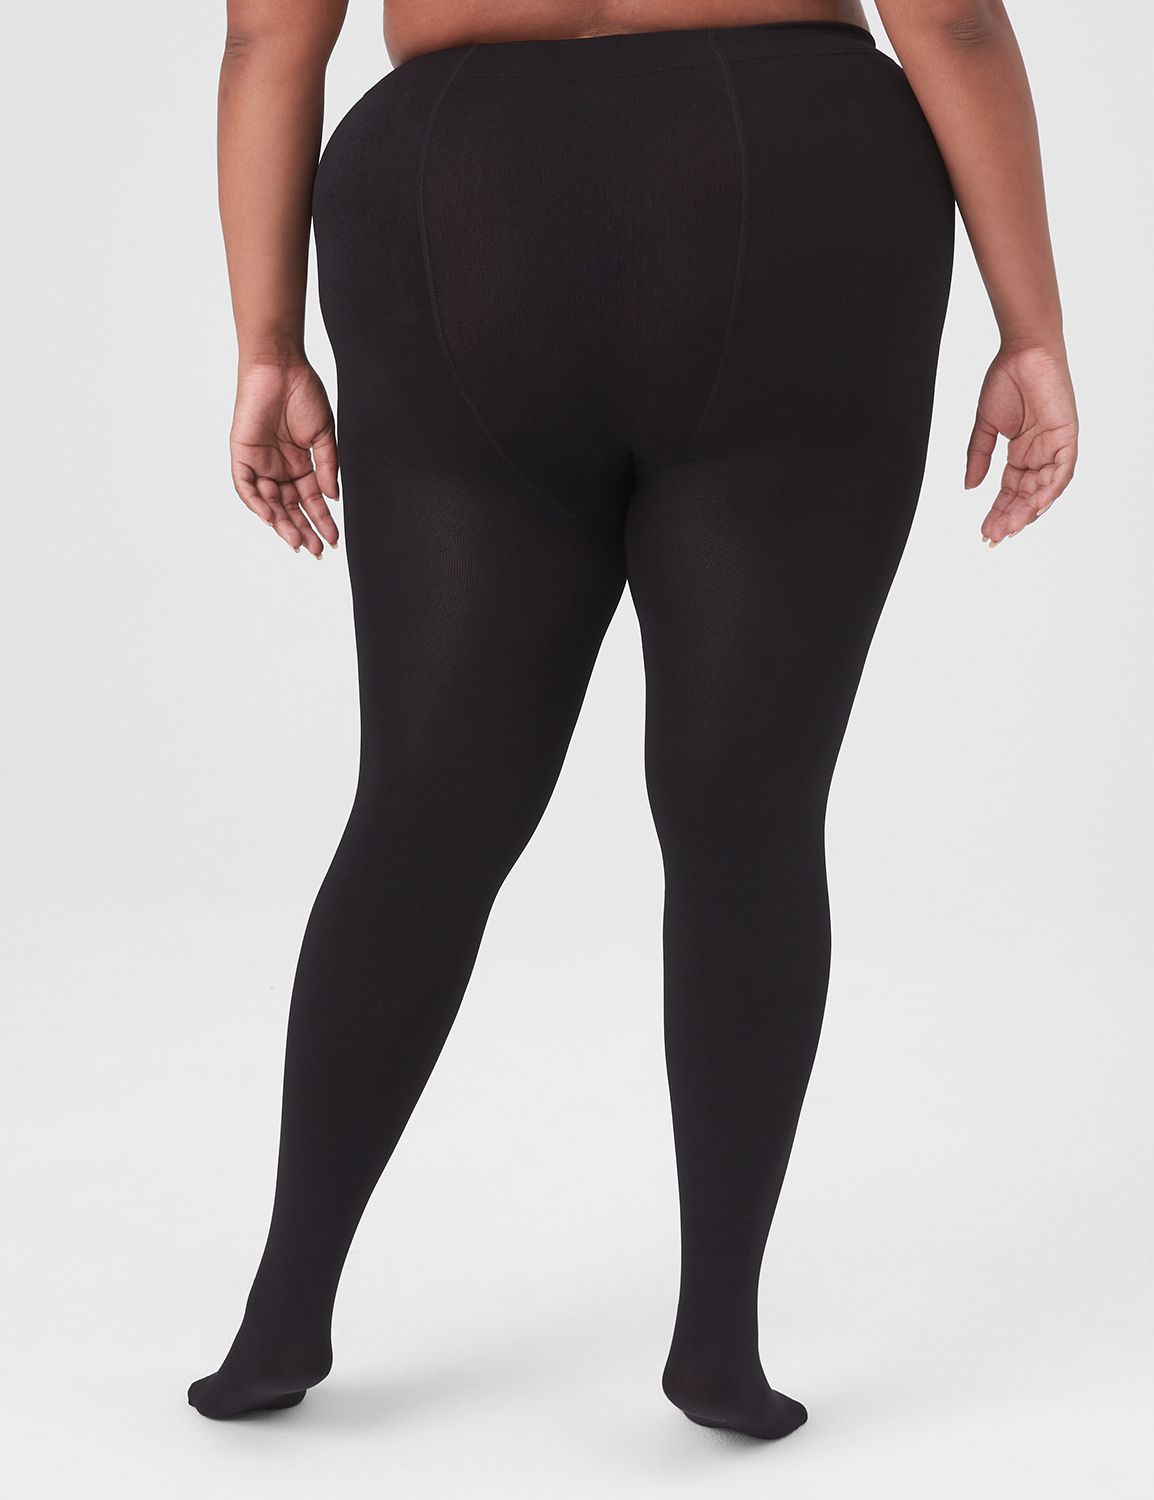 Plus Size Apt. 9® Fleece-Lined Footless Tights